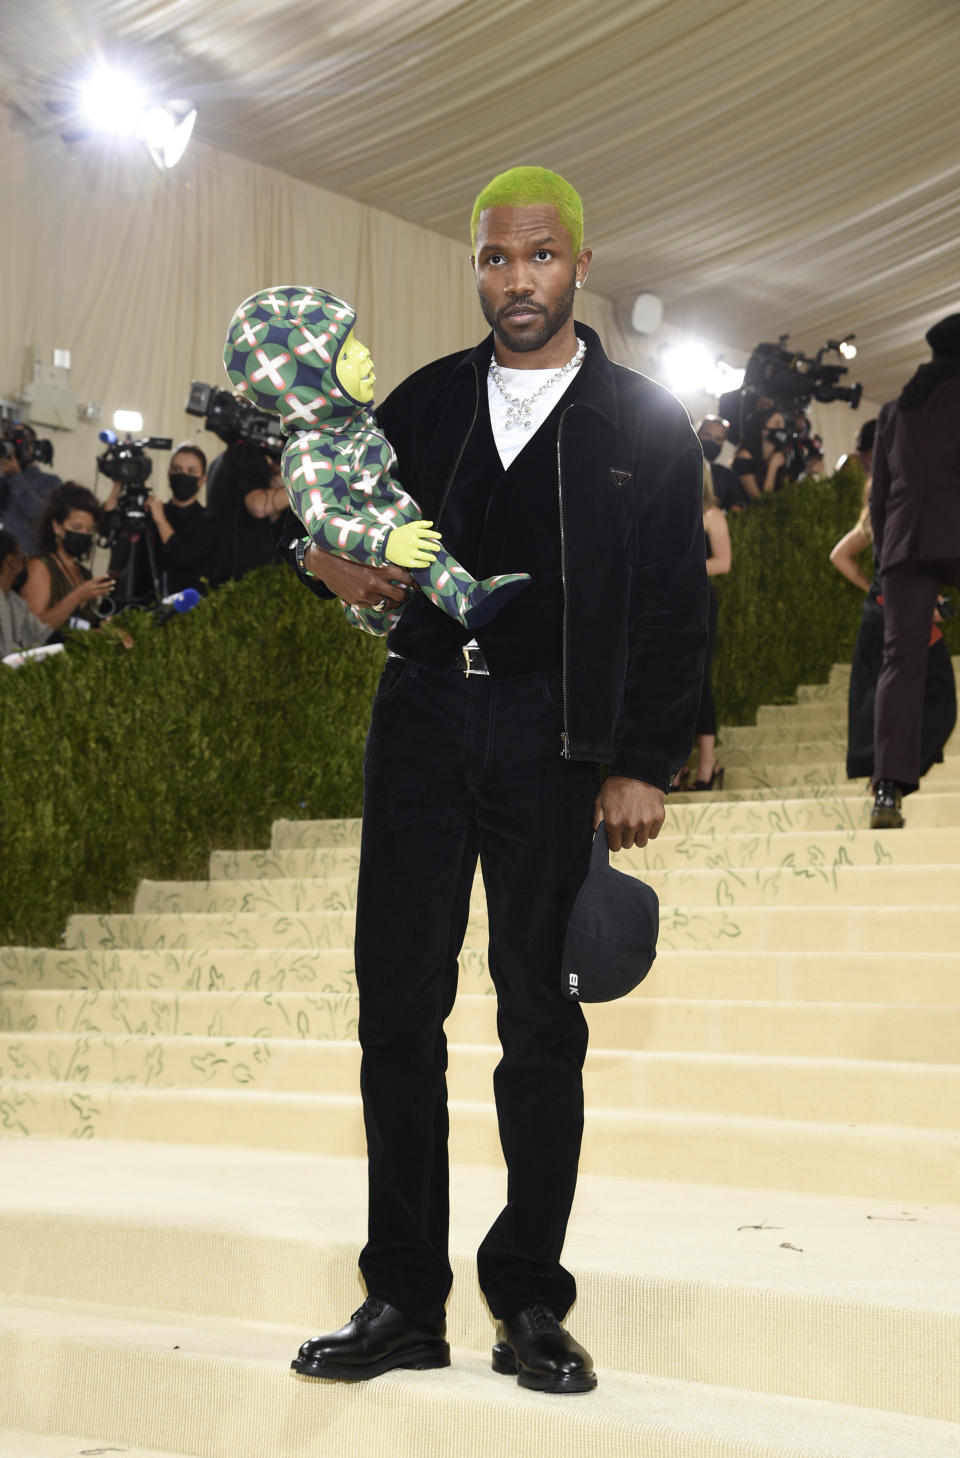 Frank Ocean attends The Metropolitan Museum of Art's Costume Institute benefit gala celebrating the opening of the "In America: A Lexicon of Fashion" exhibition on Monday, Sept. 13, 2021, in New York. (Photo by Evan Agostini/Invision/AP)